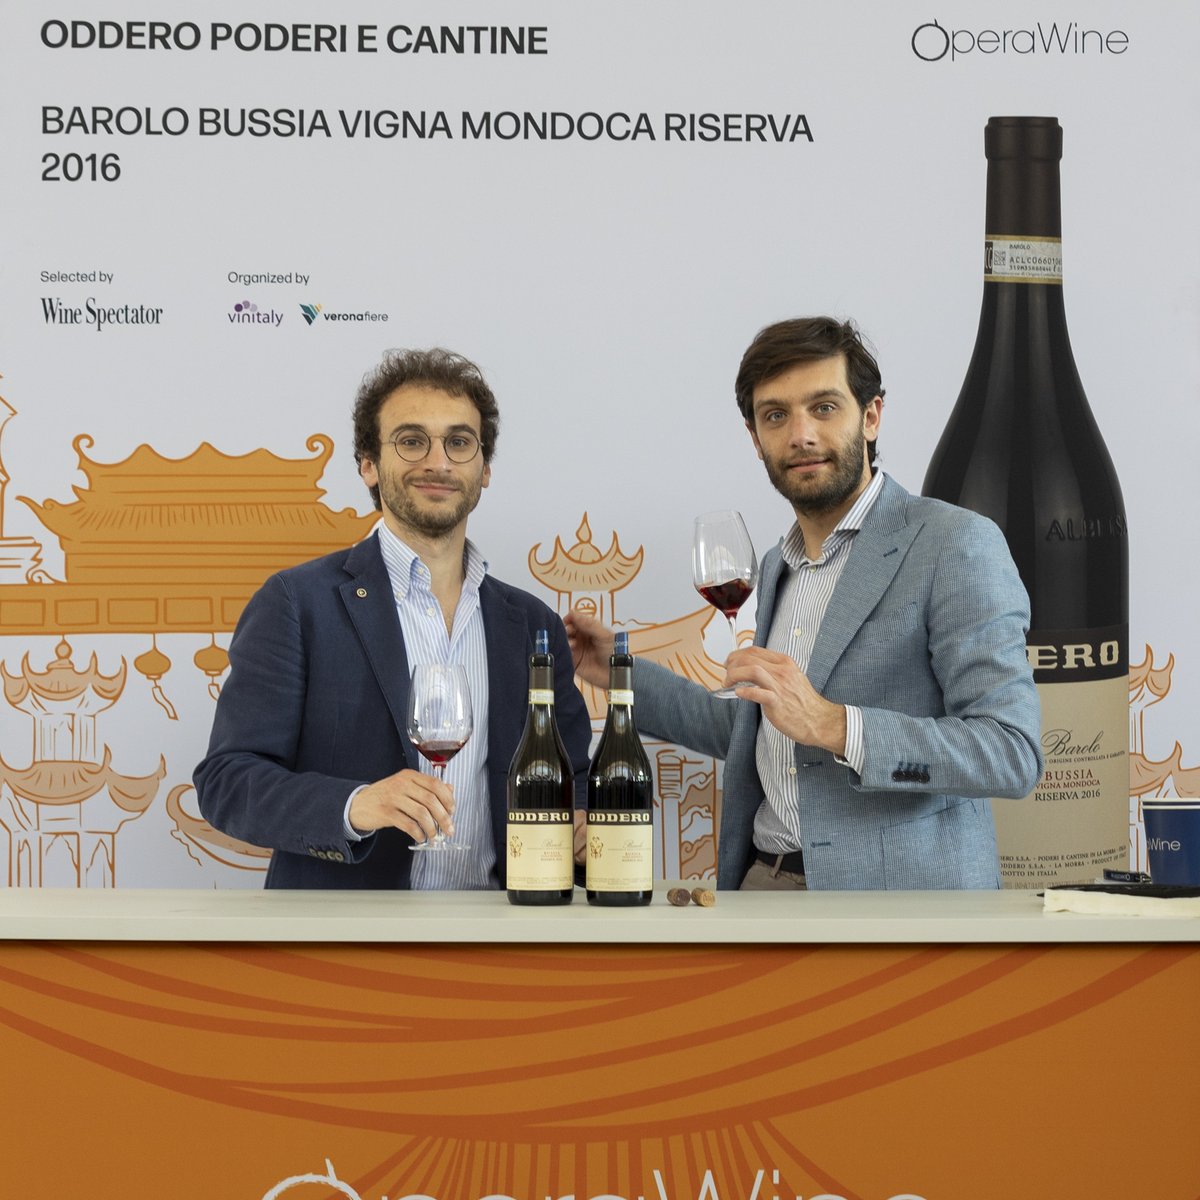 Here is the portrait of @oddero, one of the great Italian producers selected by Wine Spectator for #OperaWine2024. During this year's Grand Tasting, they shared with guests their Barolo Bussia Vigna Mondoca Riserva 2016. Congratulations! #Vinitaly2024 #finestitalianwines